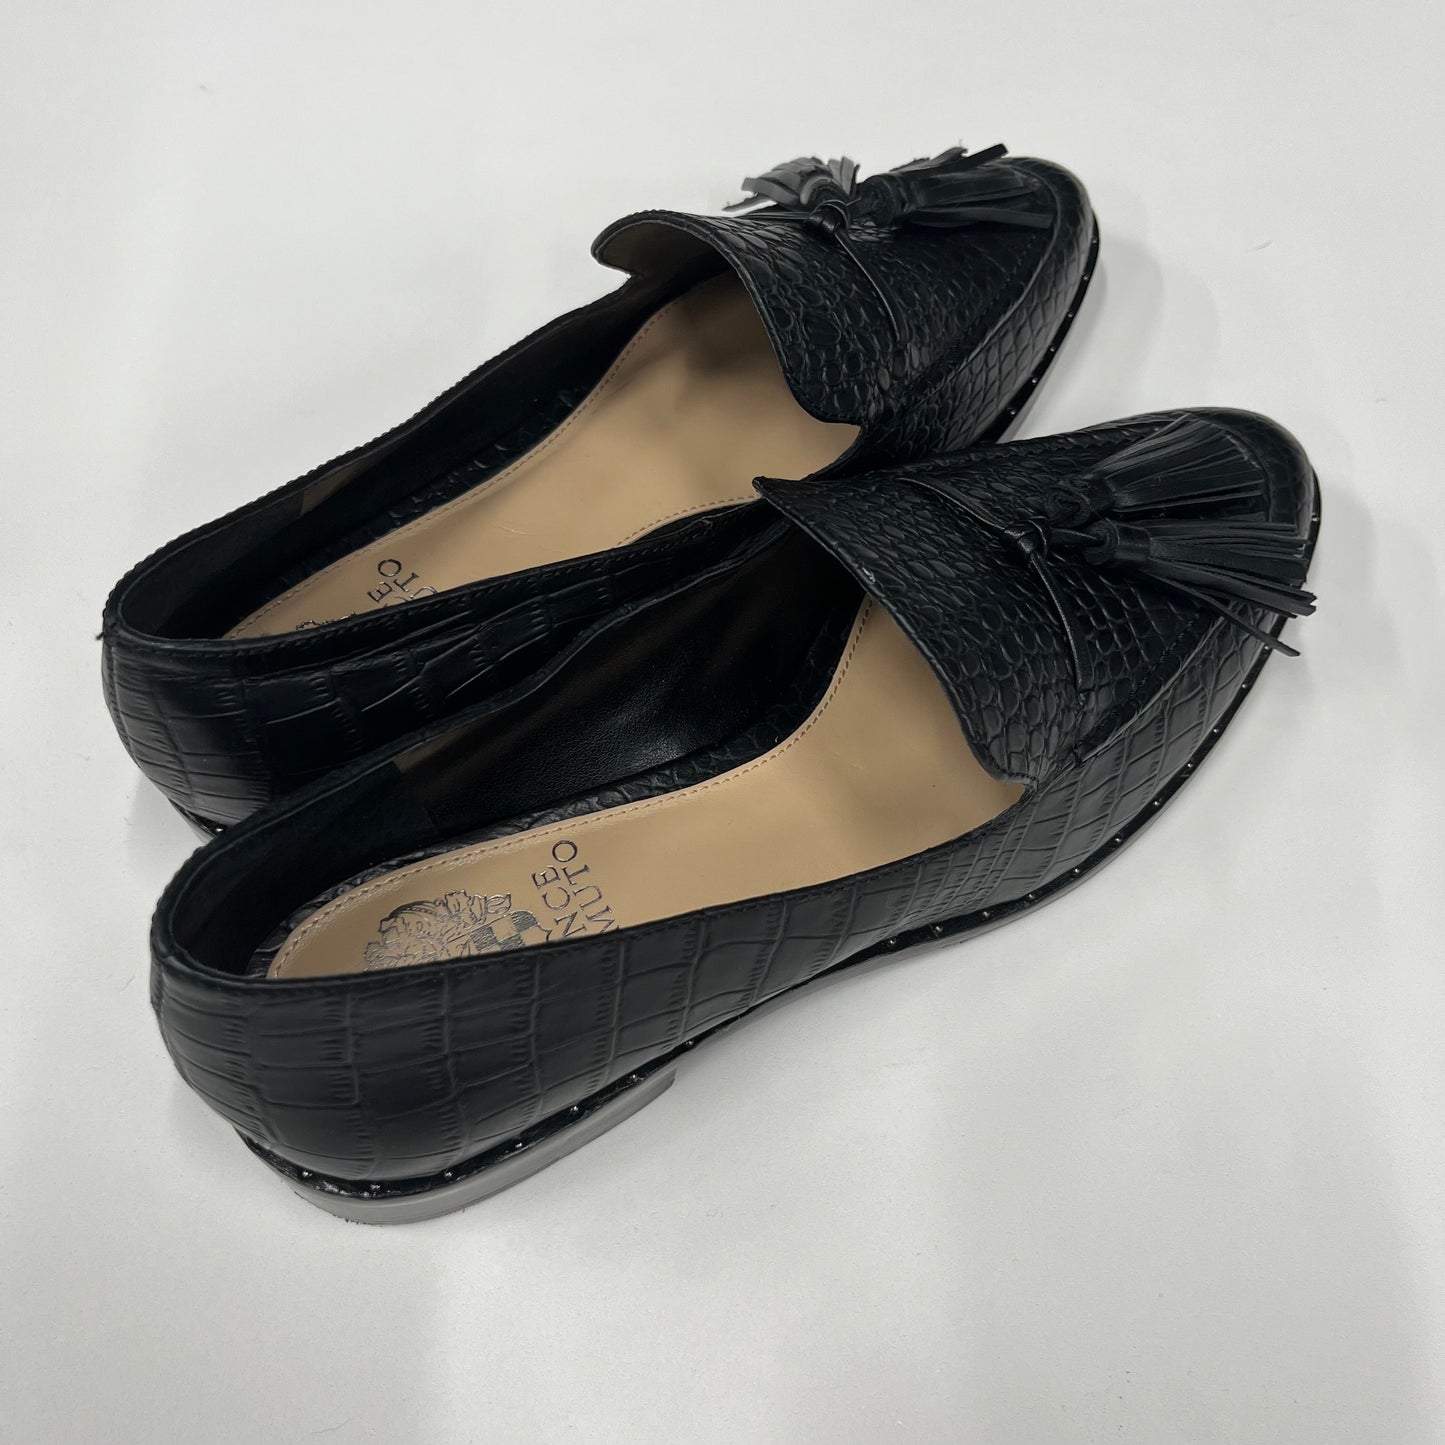 Shoes Flats Loafer Oxford By Vince Camuto  Size: 9